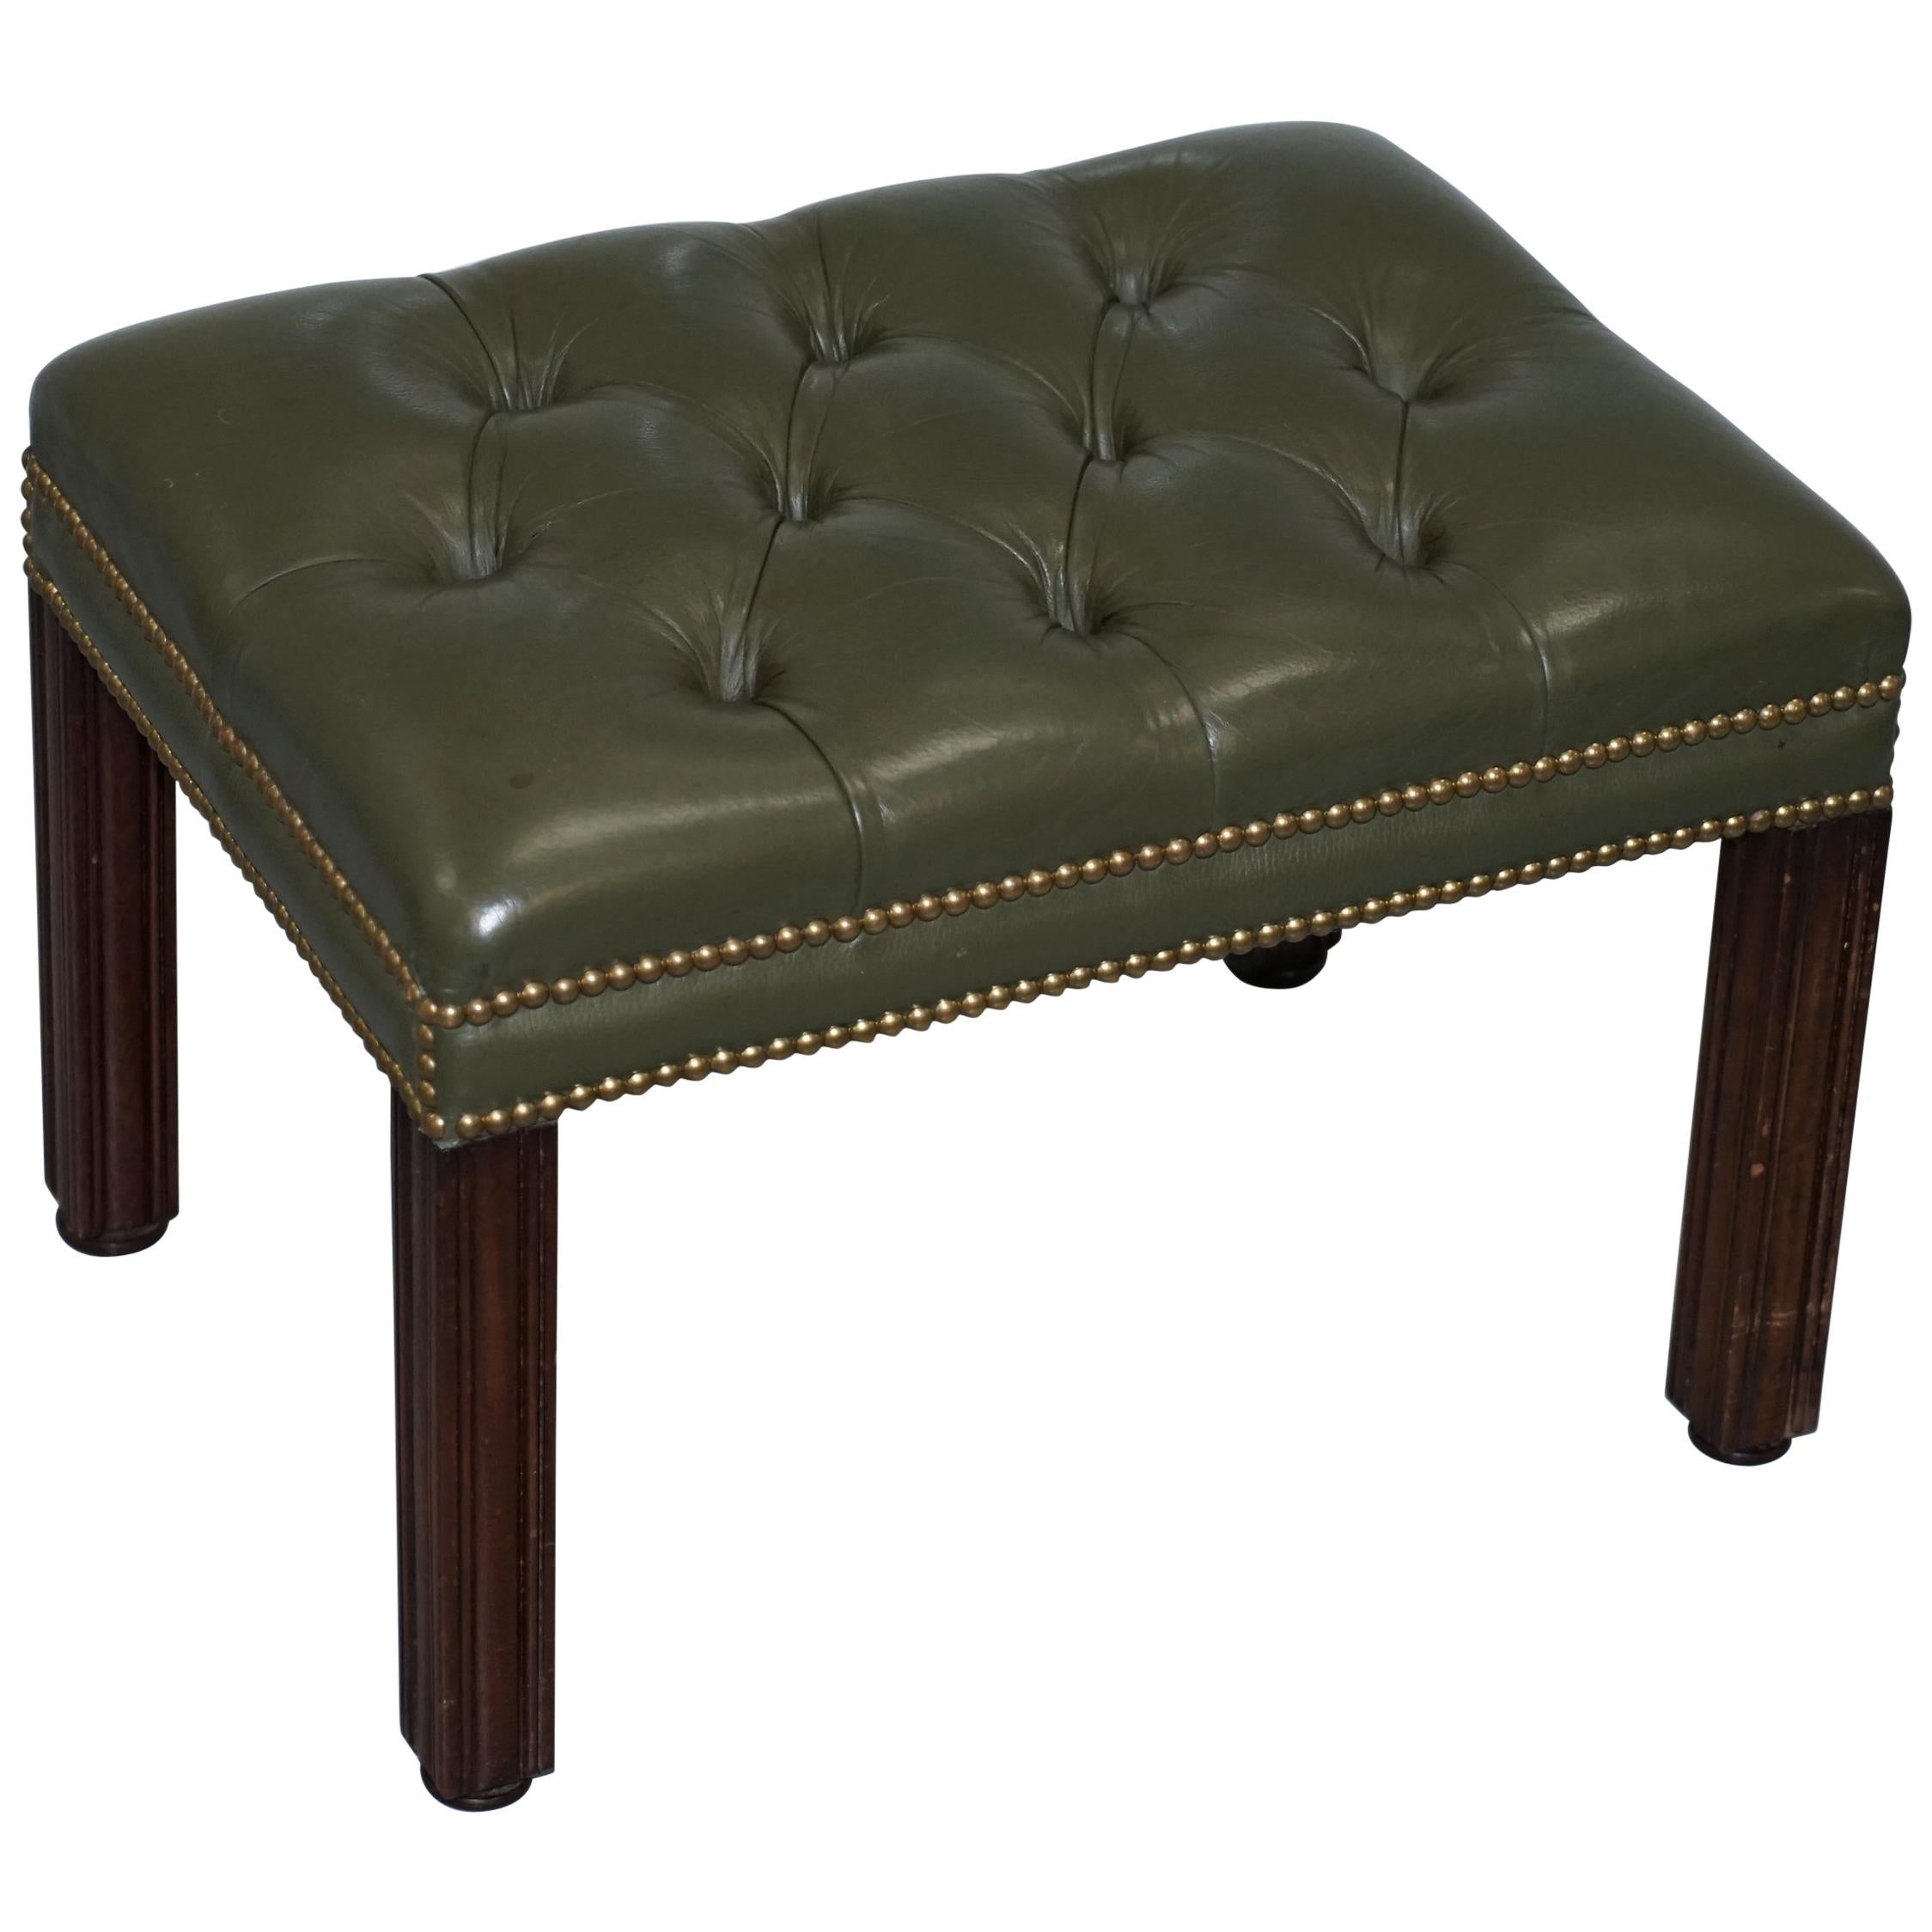 Aged Green Leather Chesterfield Mahogany Framed Footstool for Club Armchairs